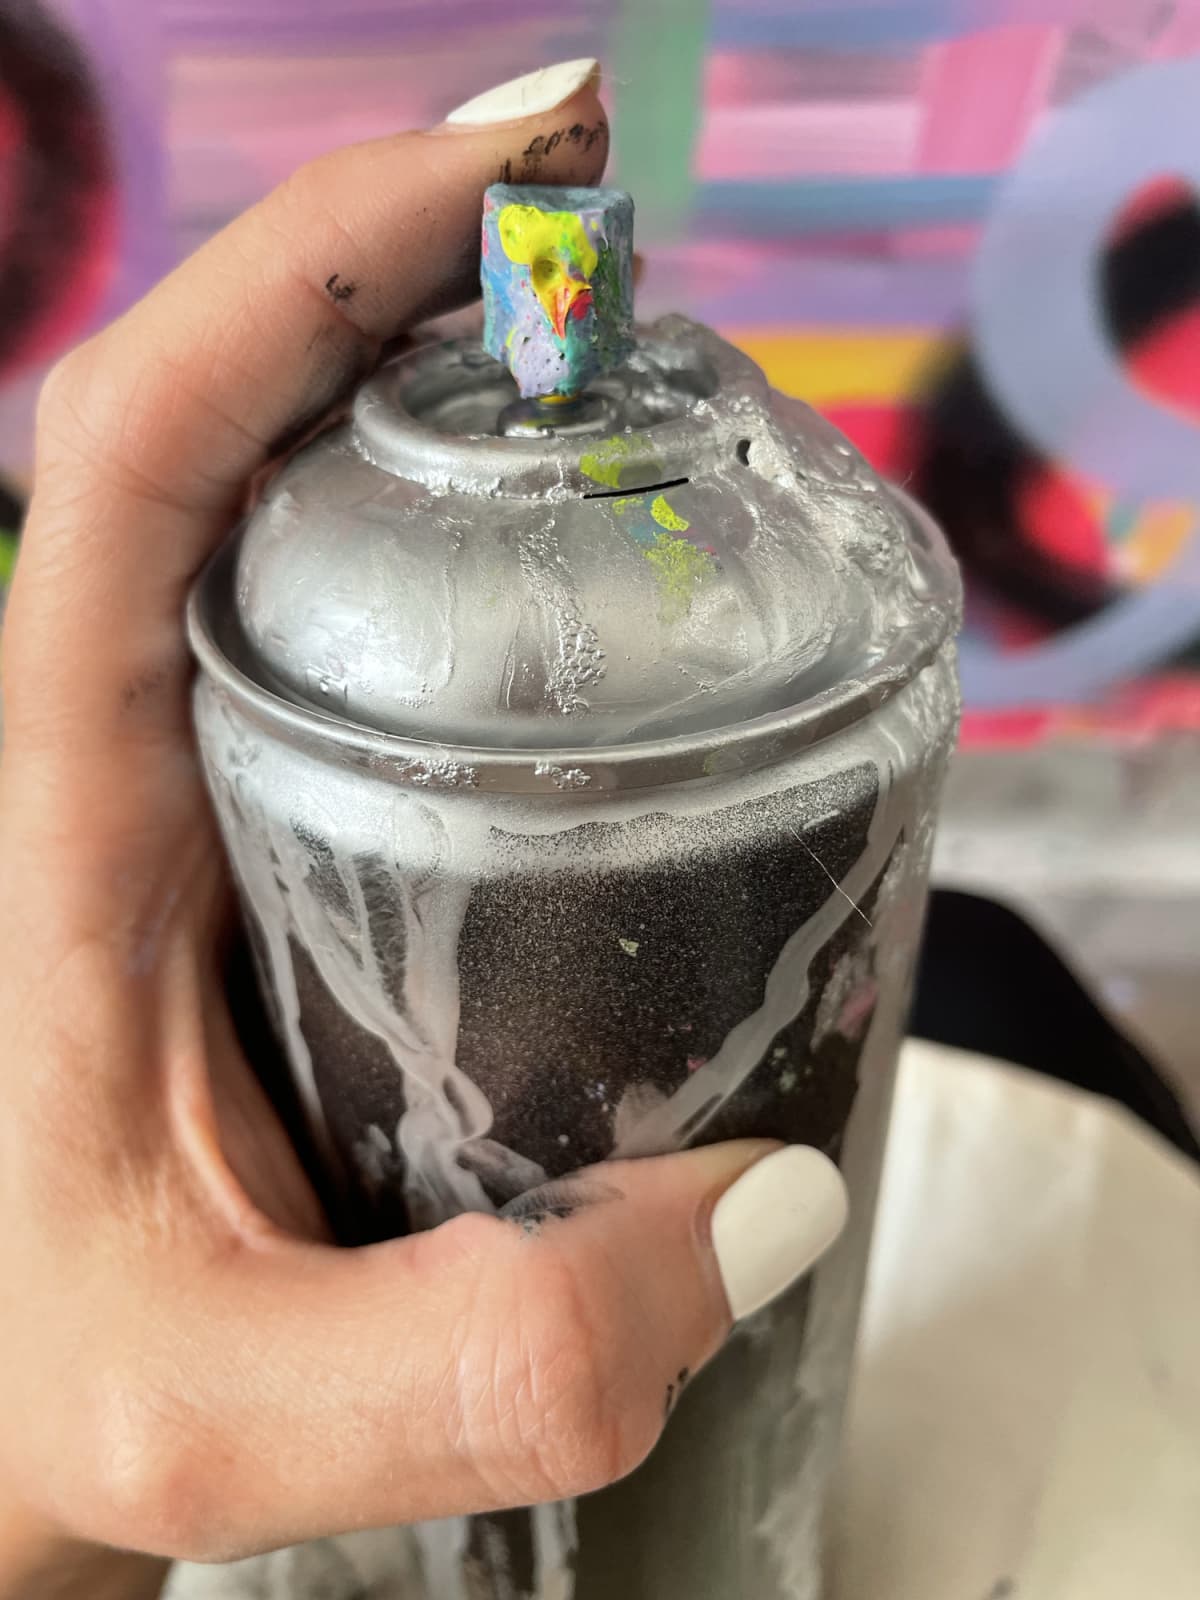 A person using a dirty can of spray paint